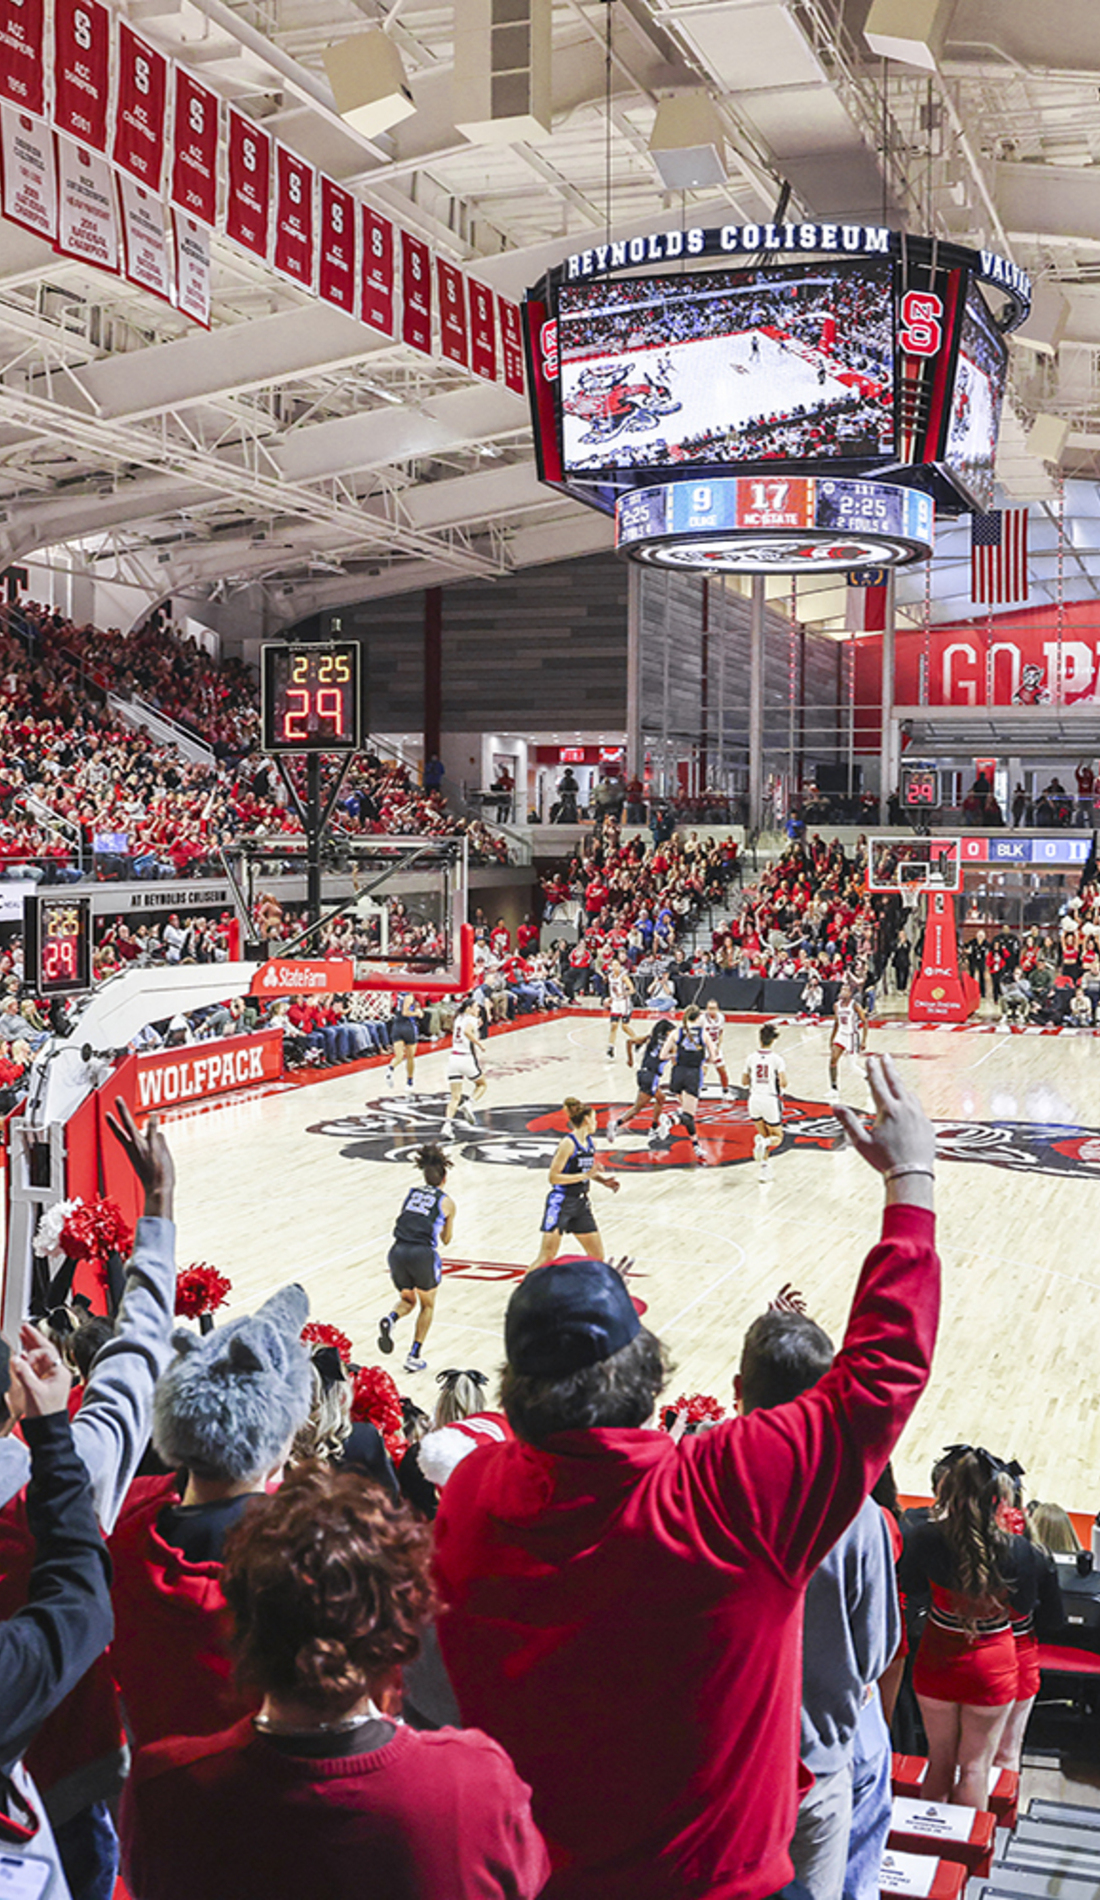 A NC State Wolfpack Womens Basketball live event